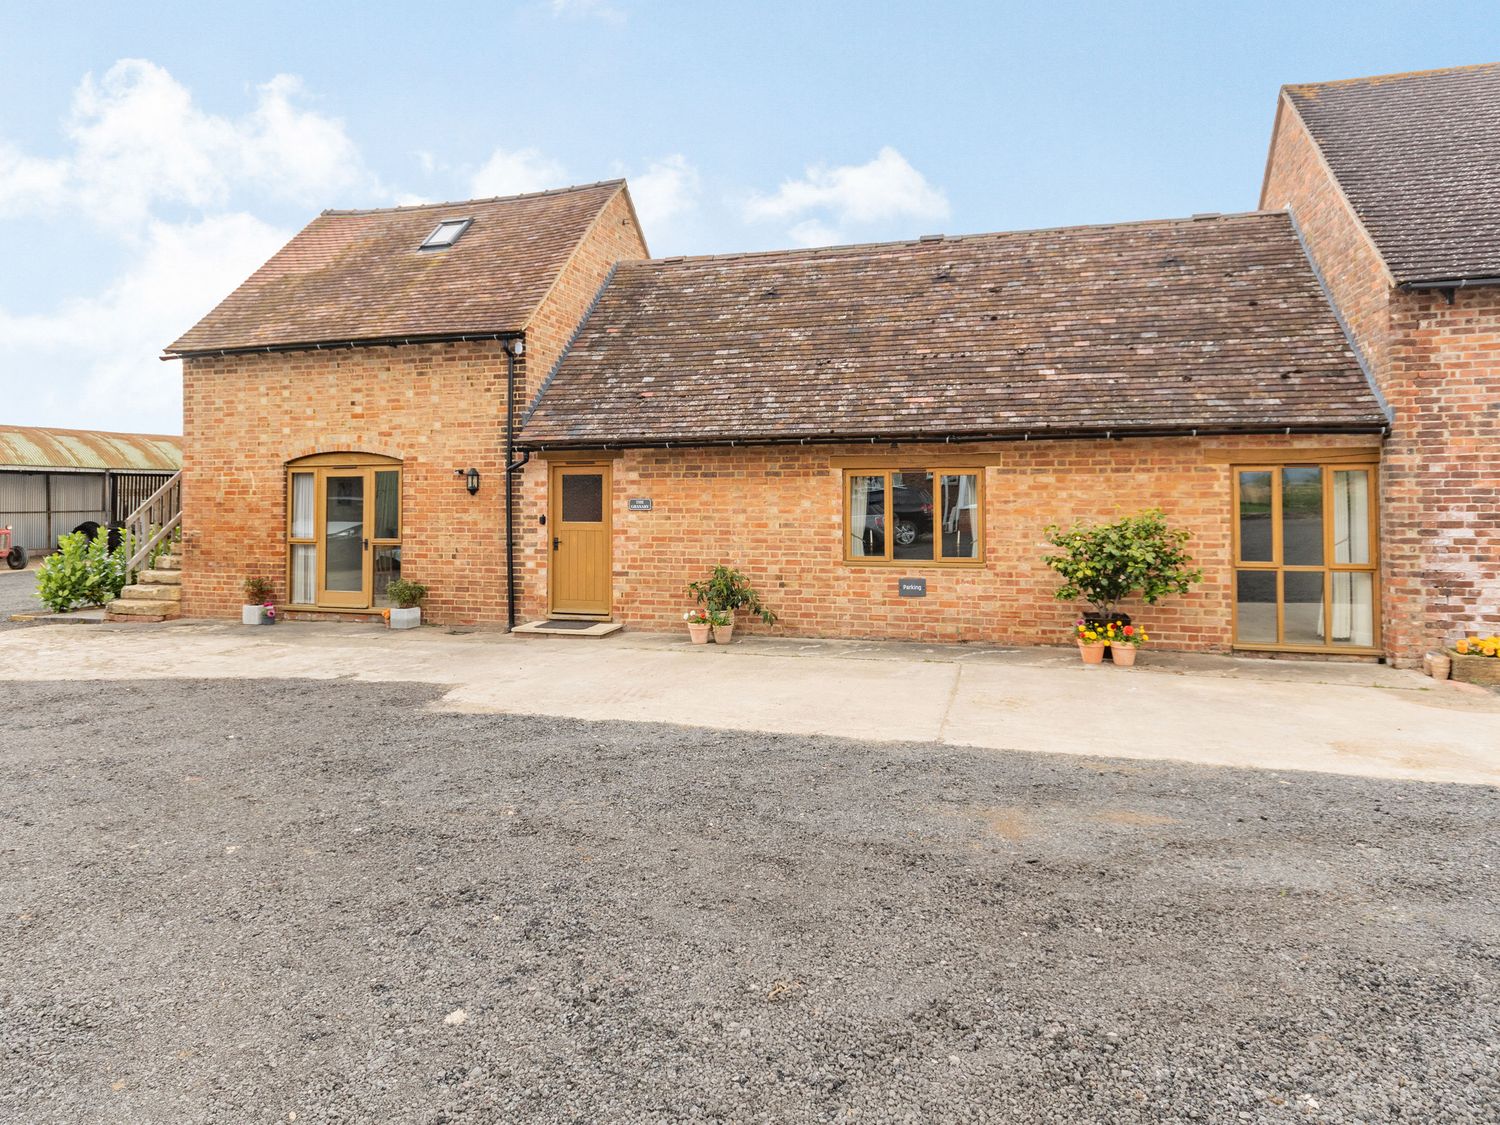 The Granary at Lane End Farm - Cotswolds - 1093705 - photo 1